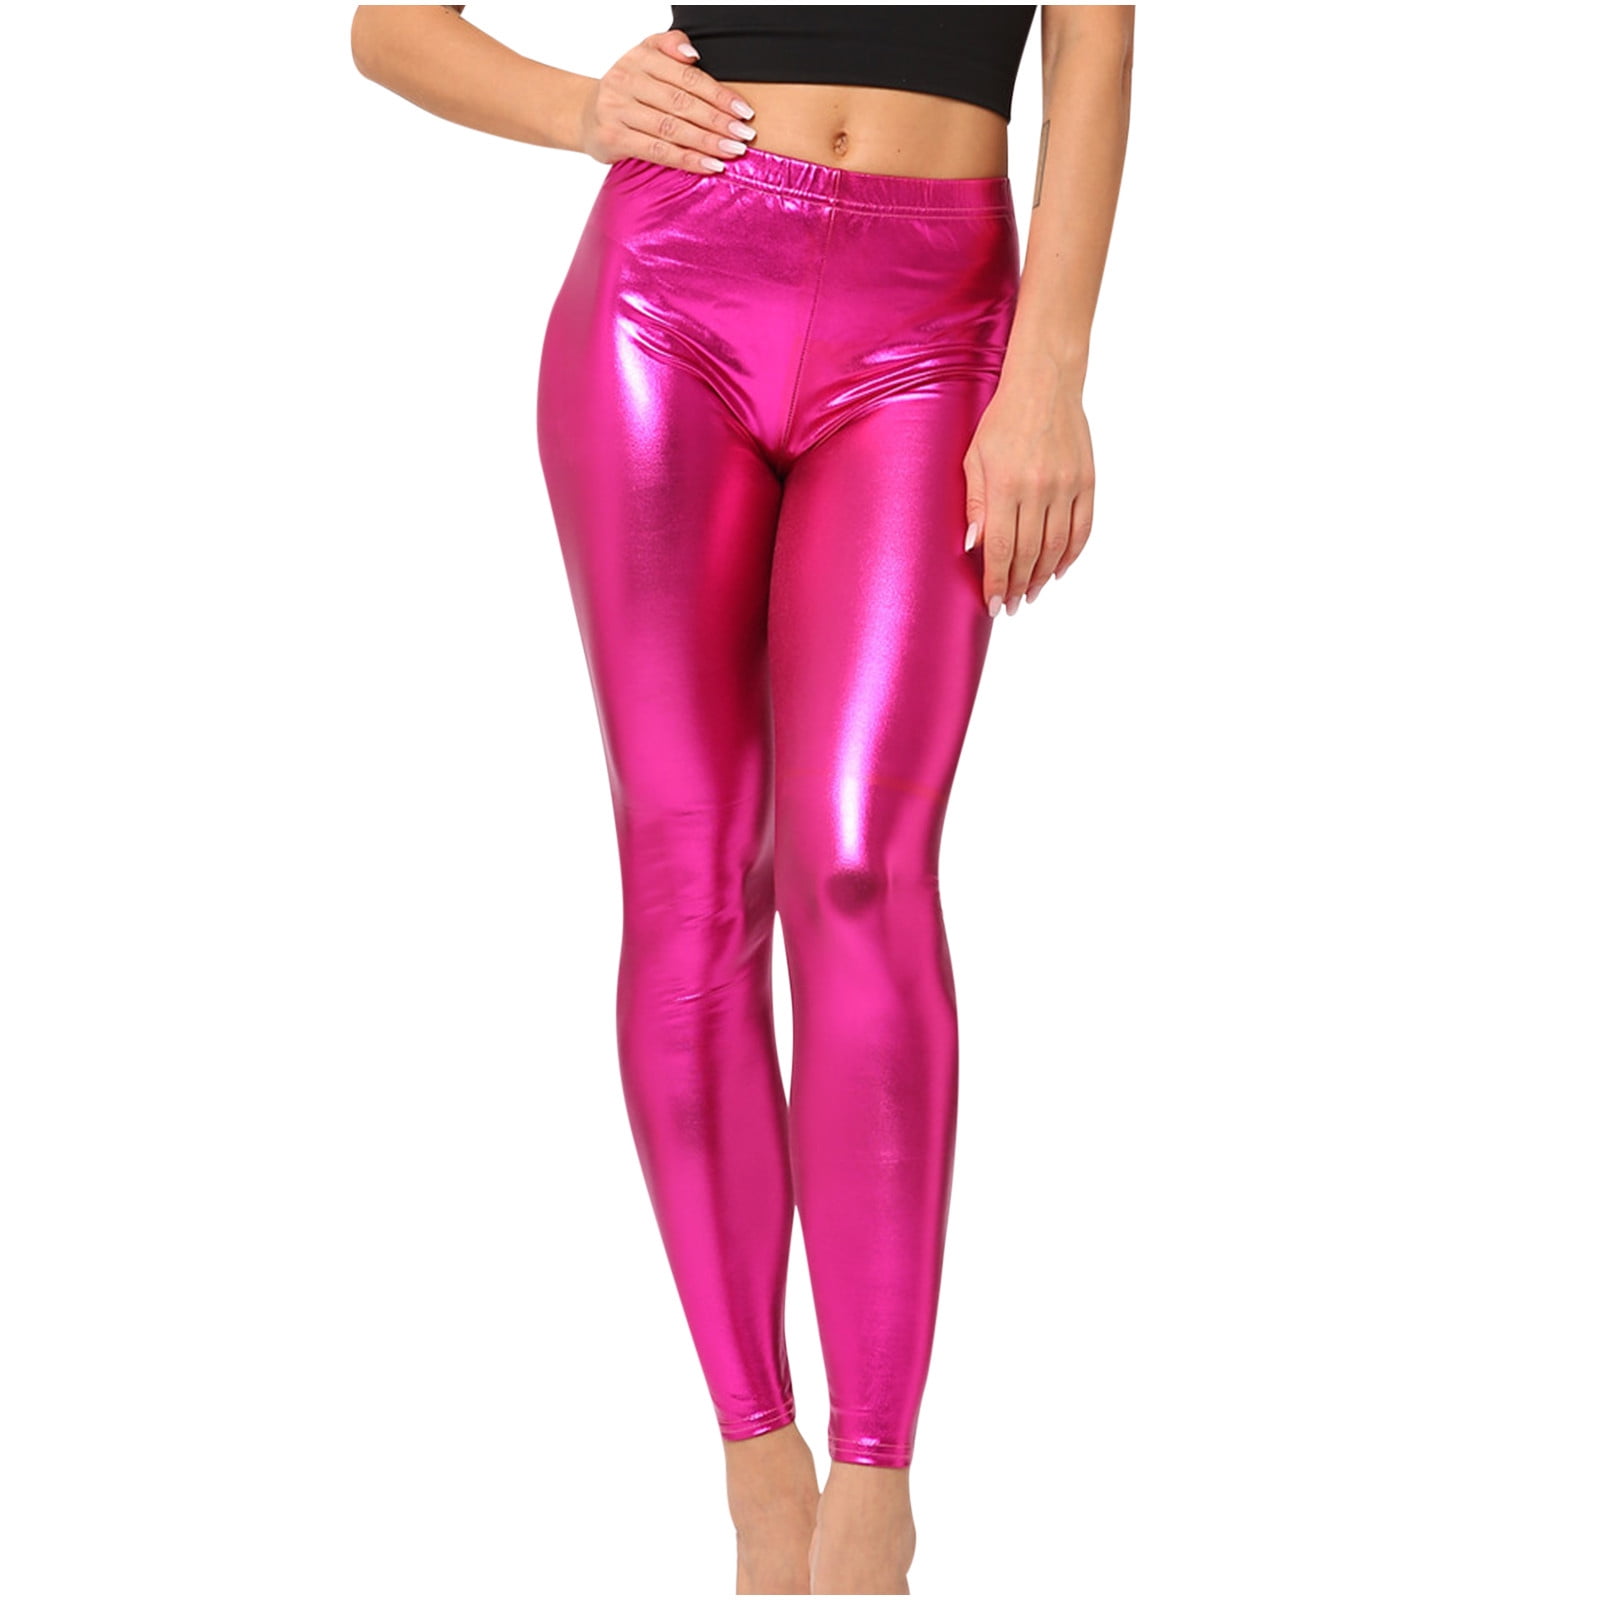 Generic Leggings Women's Outer Wear Colorful Shiny Pants Summer Skinny Thin  Tappered Pencil Pants Leggings @ Best Price Online